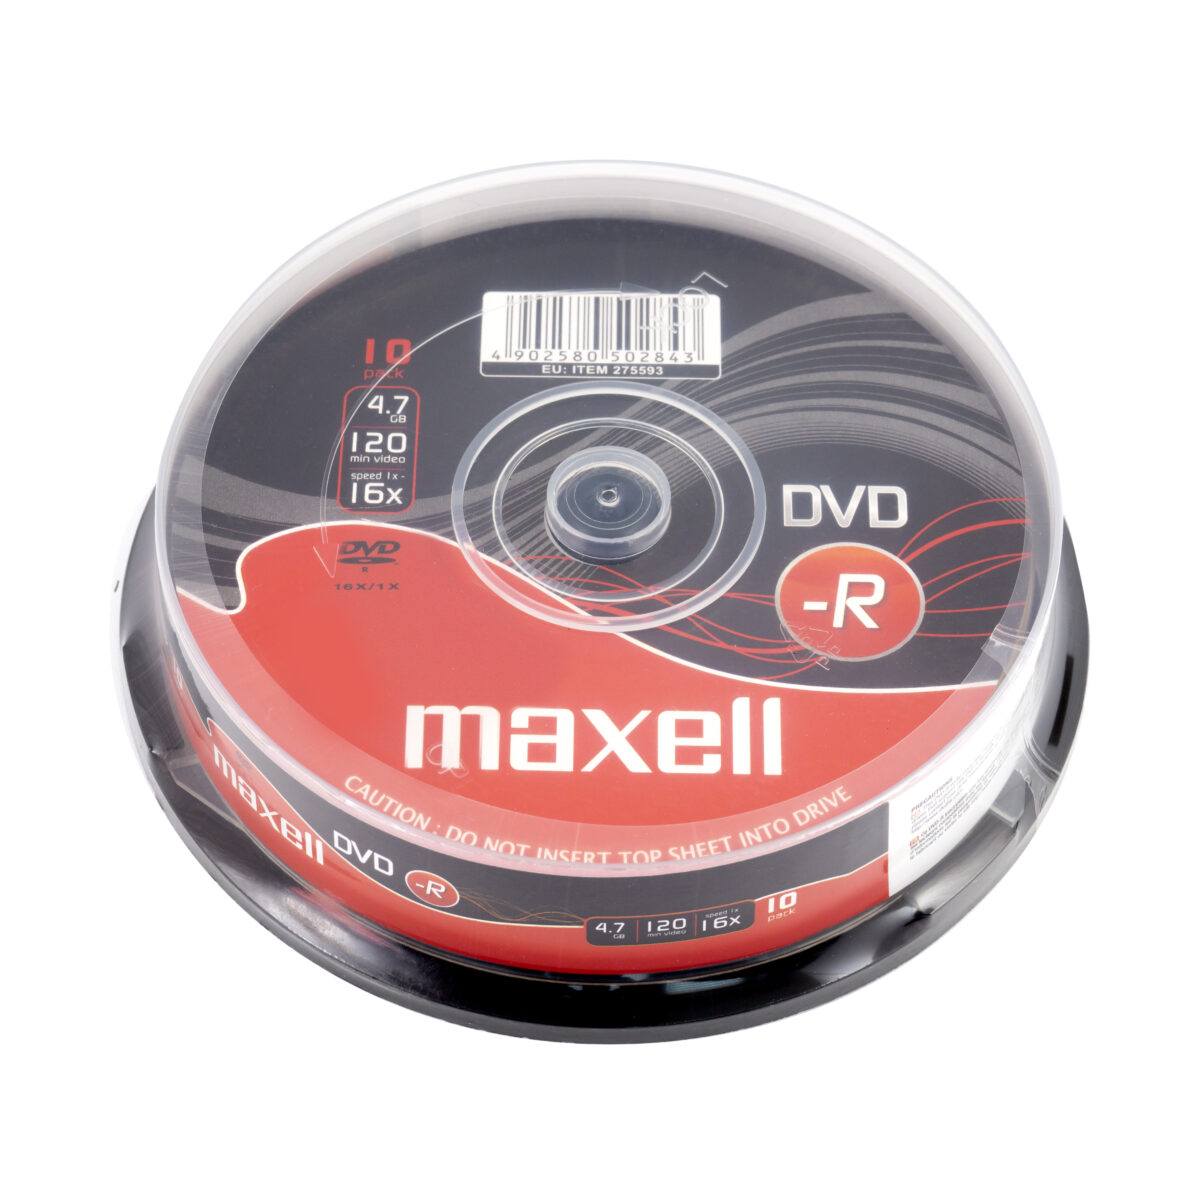 DVD-R 47 10 Pack Spindle - Maxell